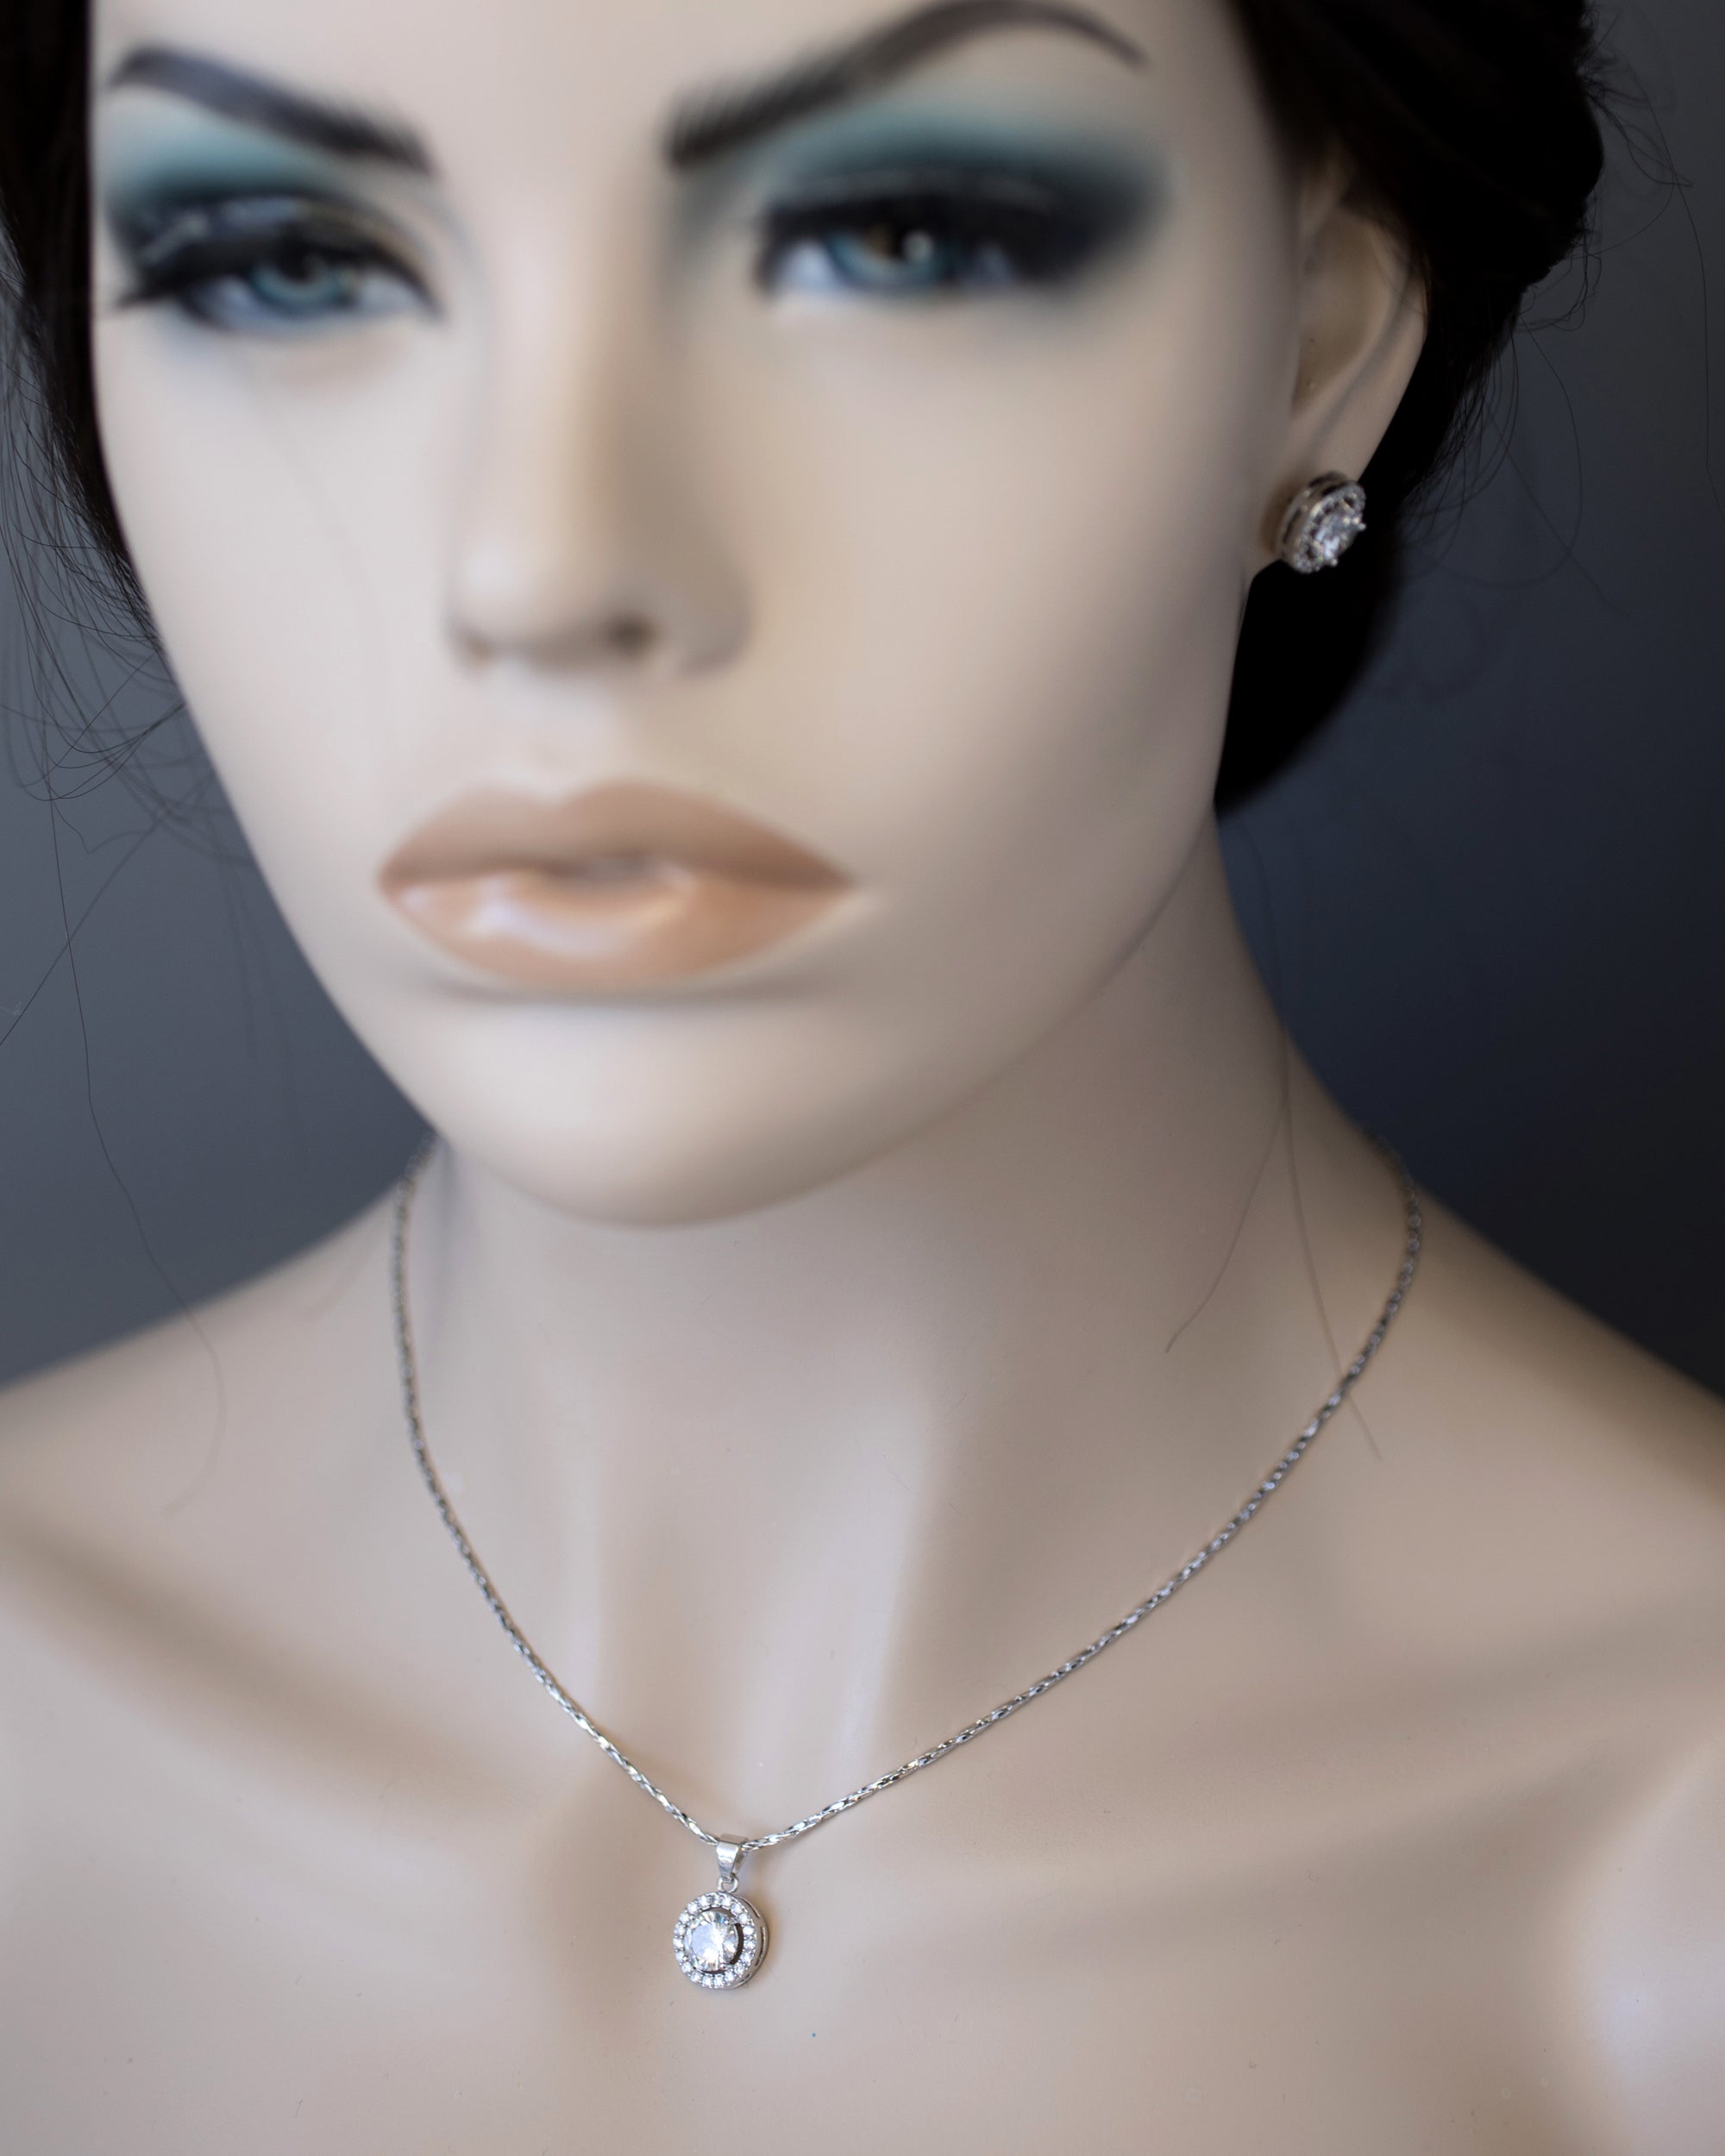 Simple CZ Halo Necklace and Earrings Set - Cassandra Lynne